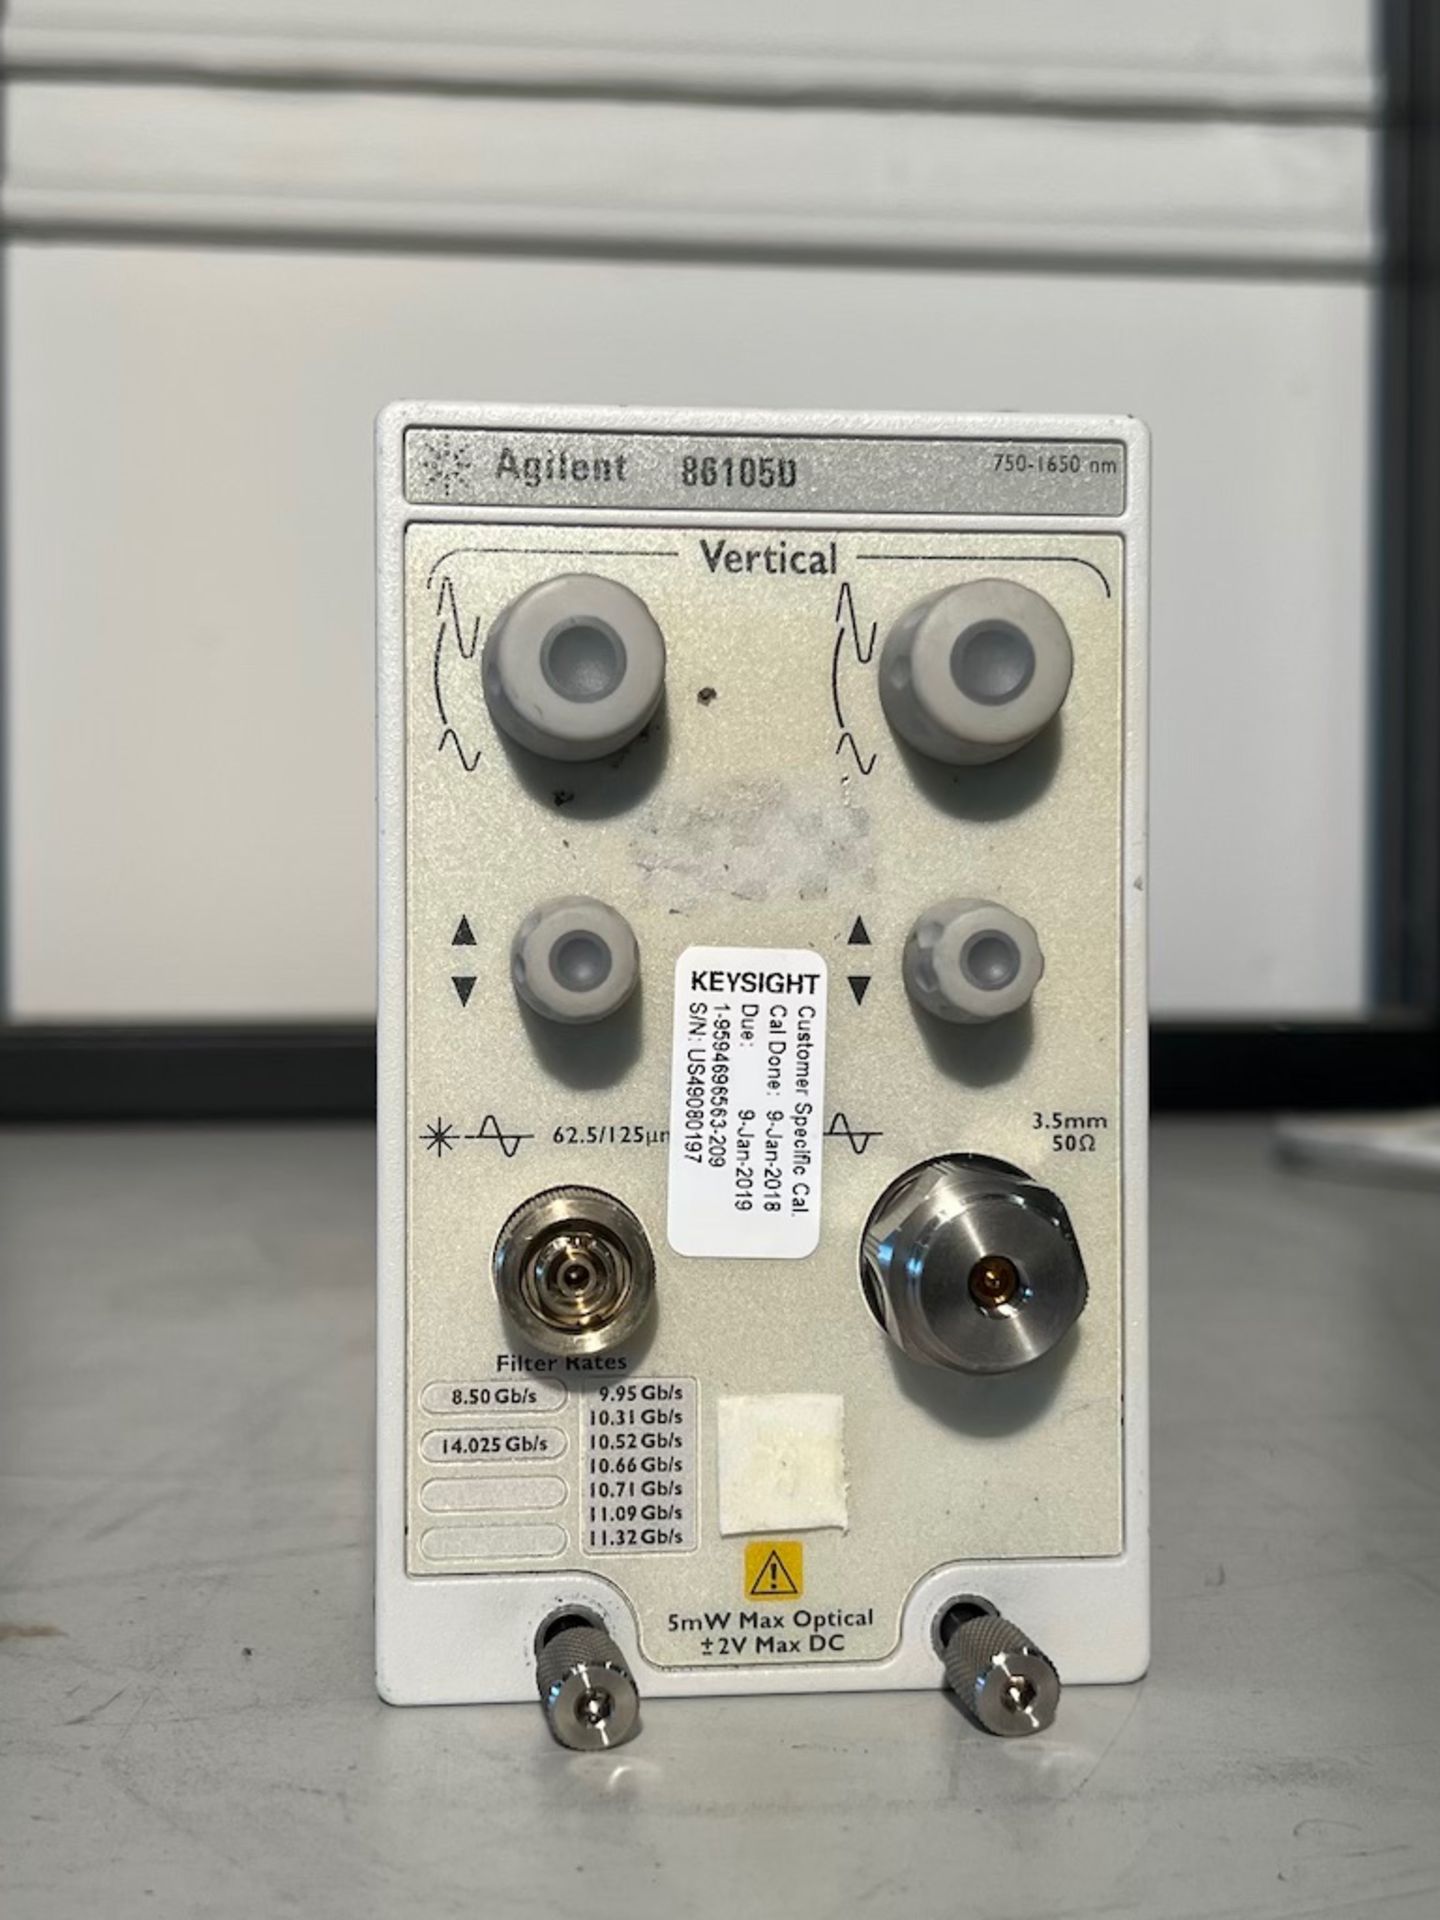 Agilent 86105D Electrical Module, 34 GHz Optical, 50 GHz, 750-1650 nm, MMF And SMF. Located at